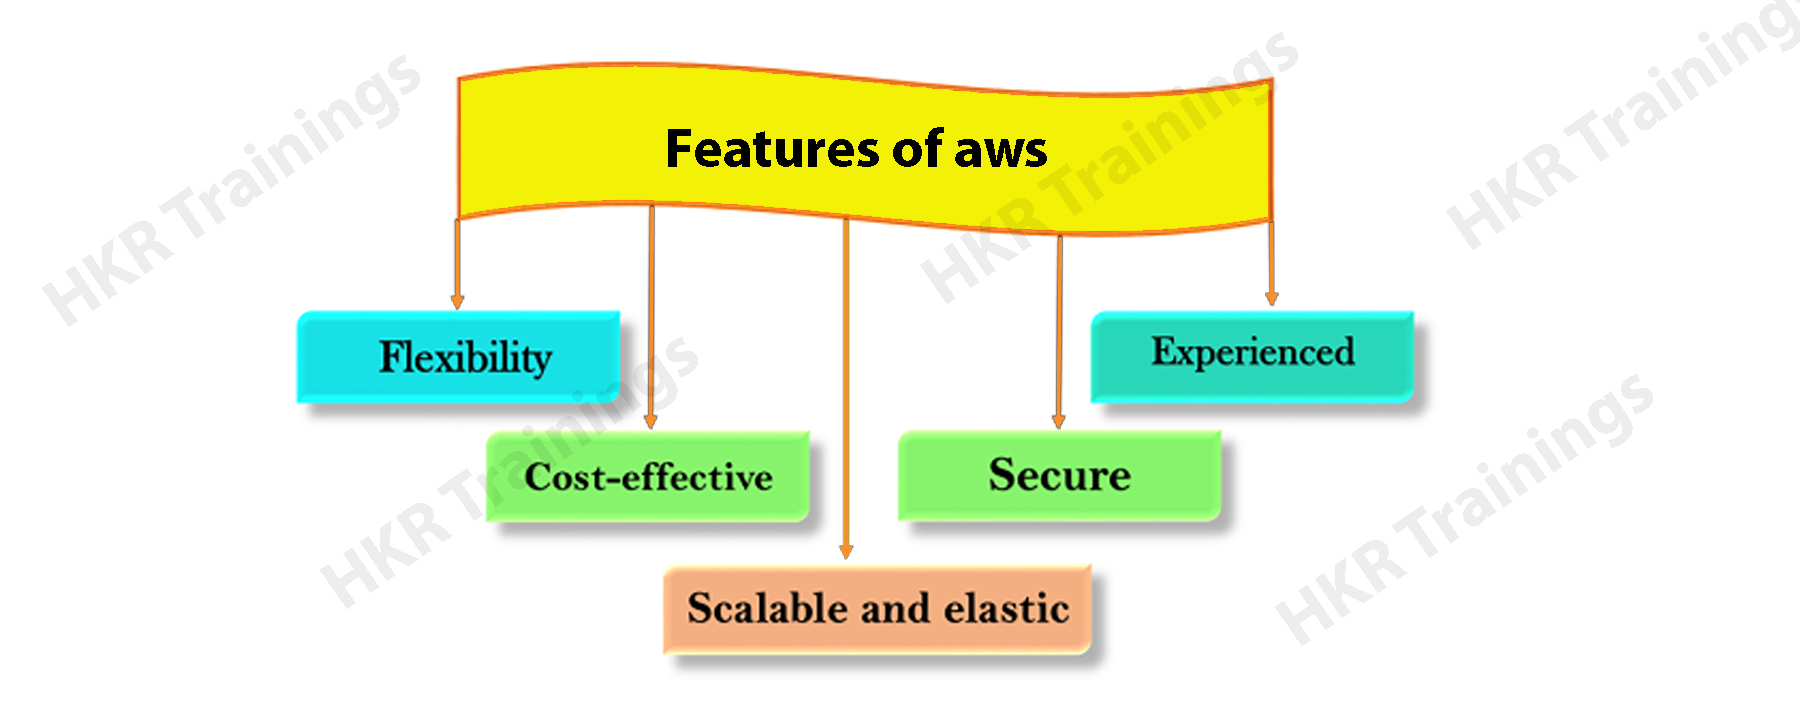 AWS features